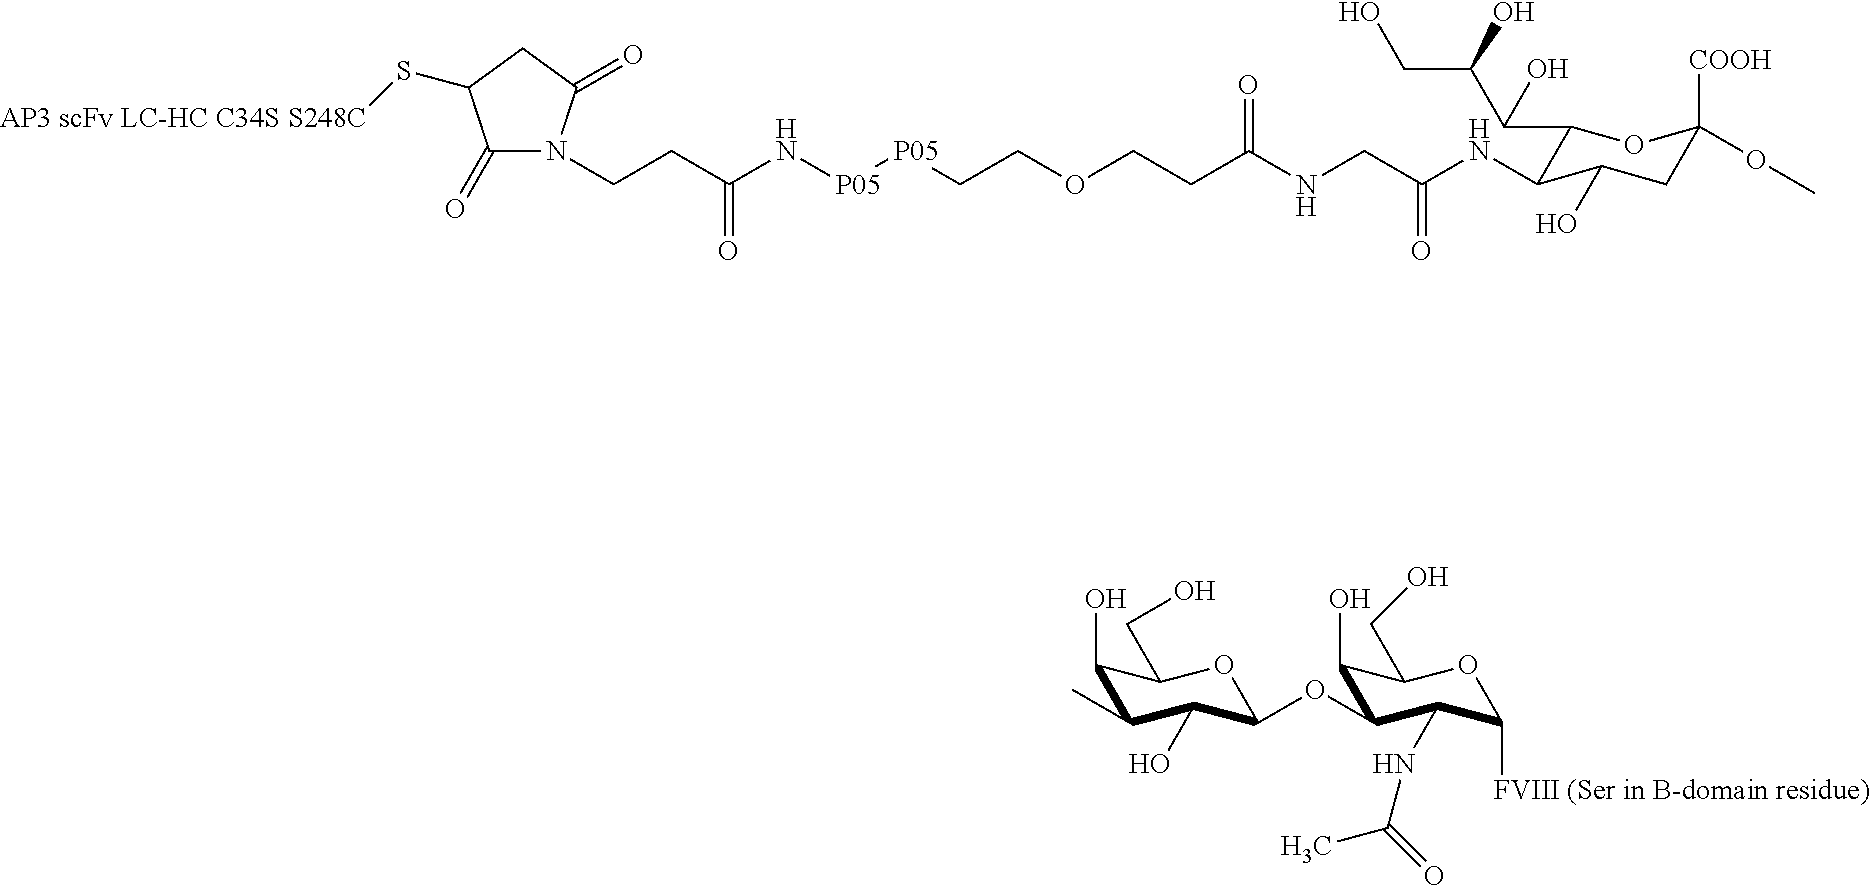 Factor VIII Molecules With Reduced VWF Binding